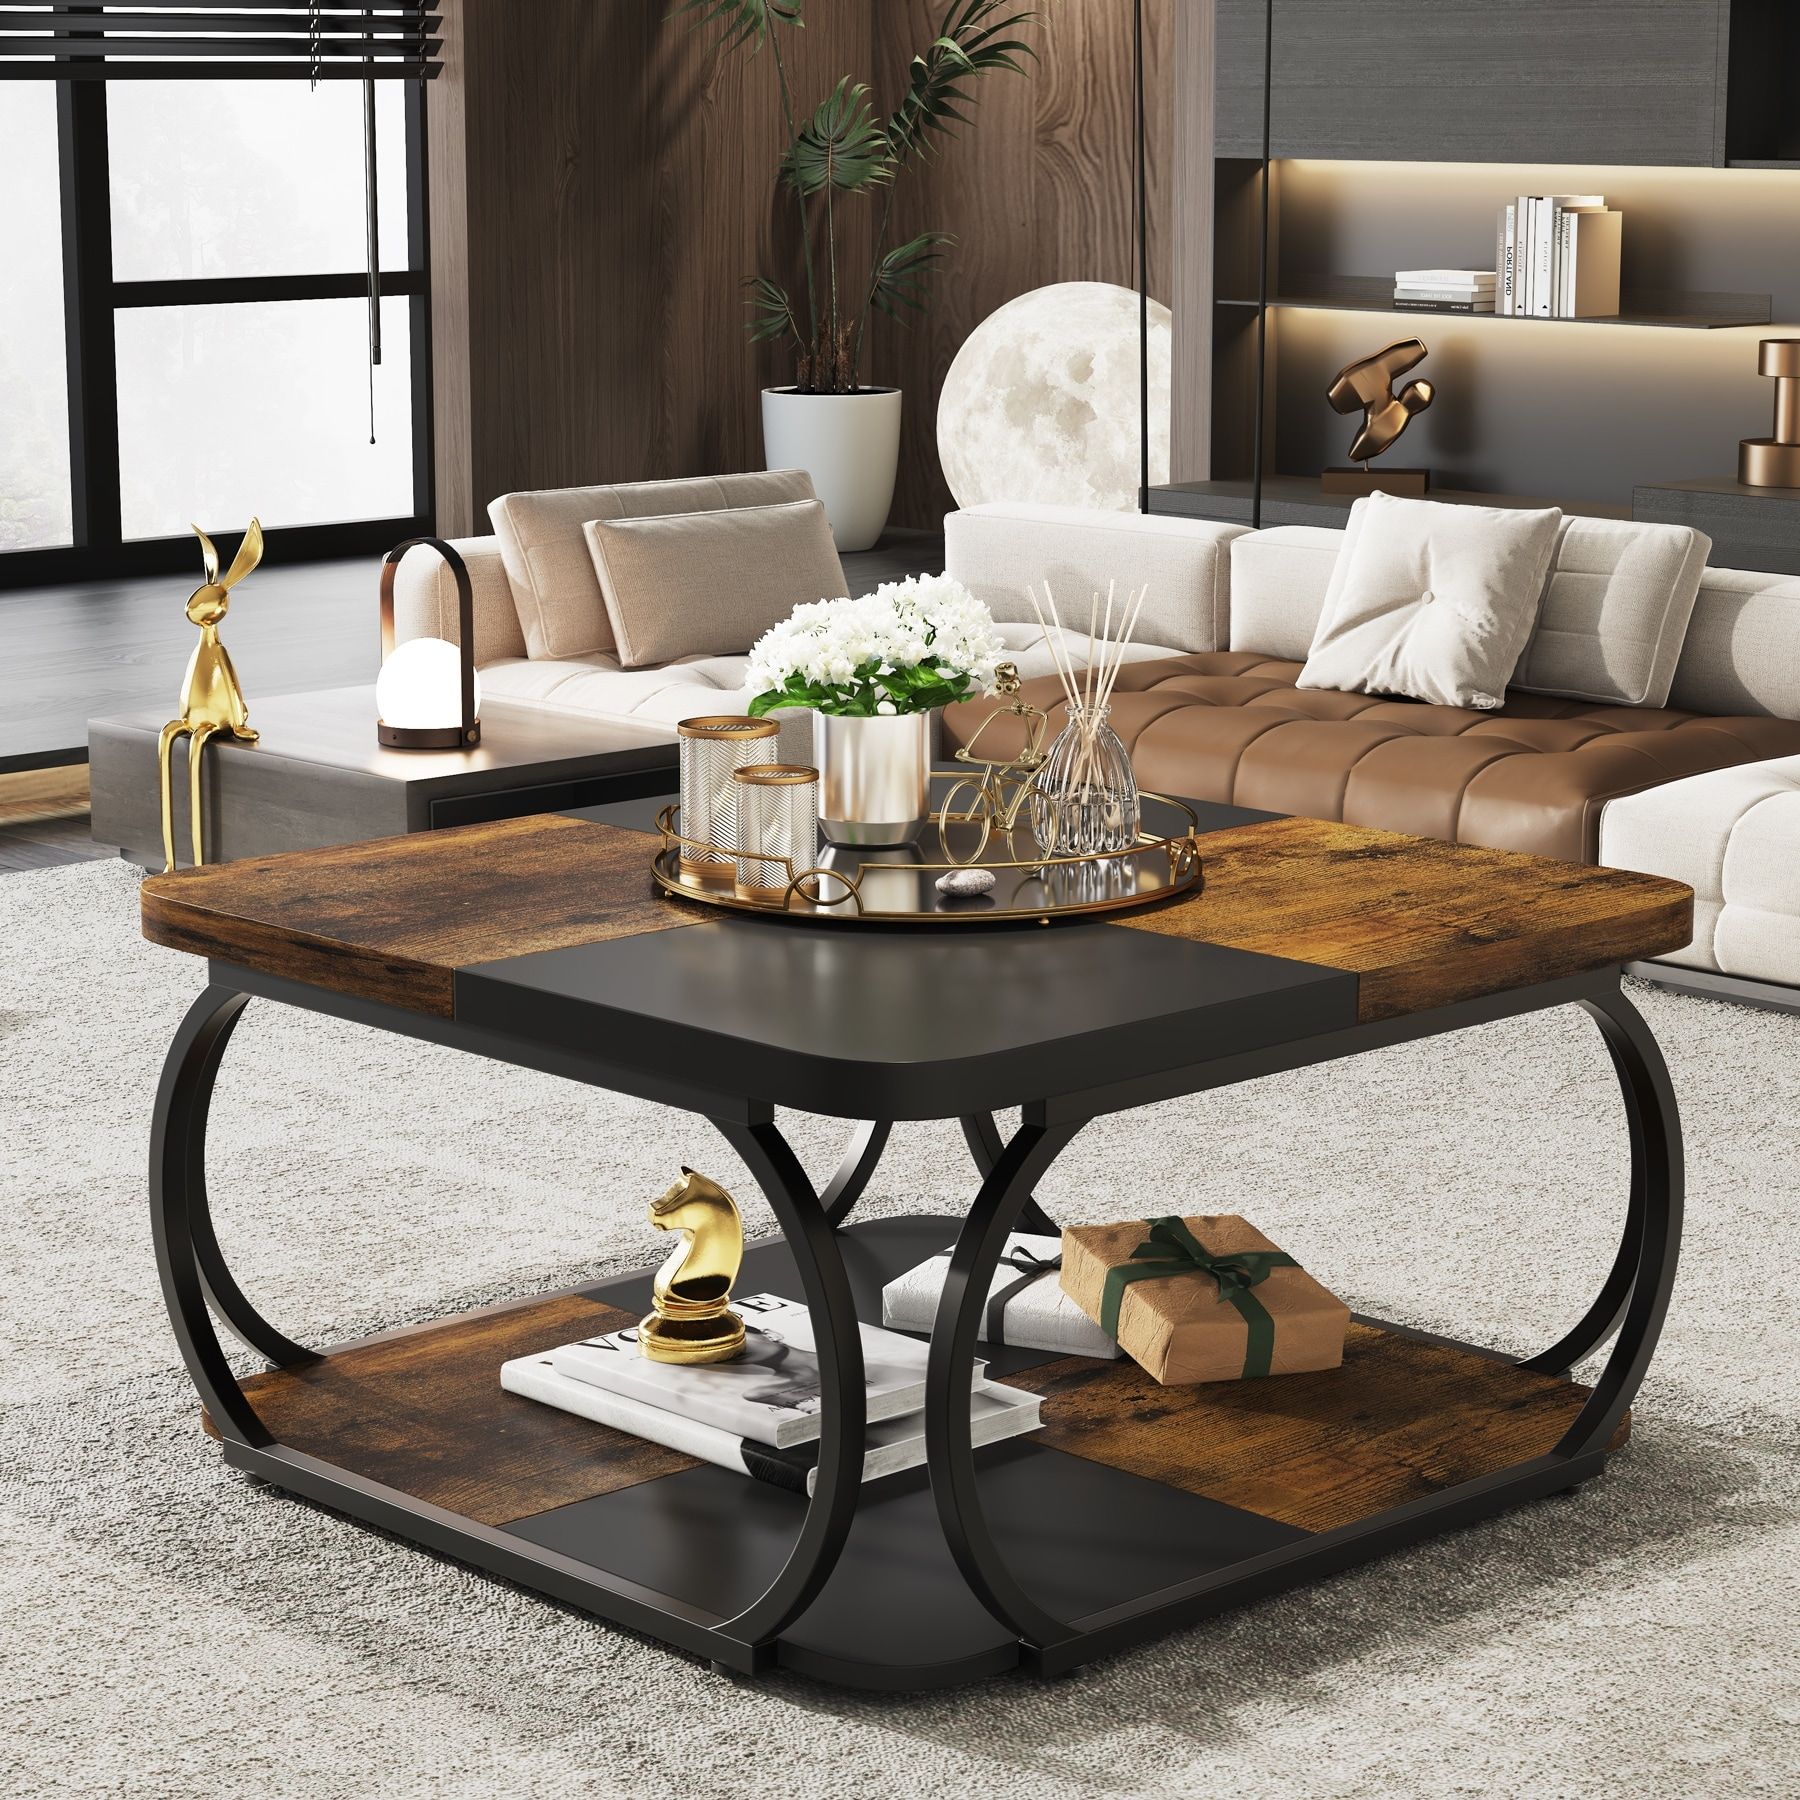 2 Tiers Square Coffee Table With Storage Shelf, 39 Inches Low Farmhouse Wood  Coffee Table For Living Room – On Sale – Bed Bath & Beyond – 38083953 Inside Wood Coffee Tables With 2 Tier Storage (View 8 of 15)